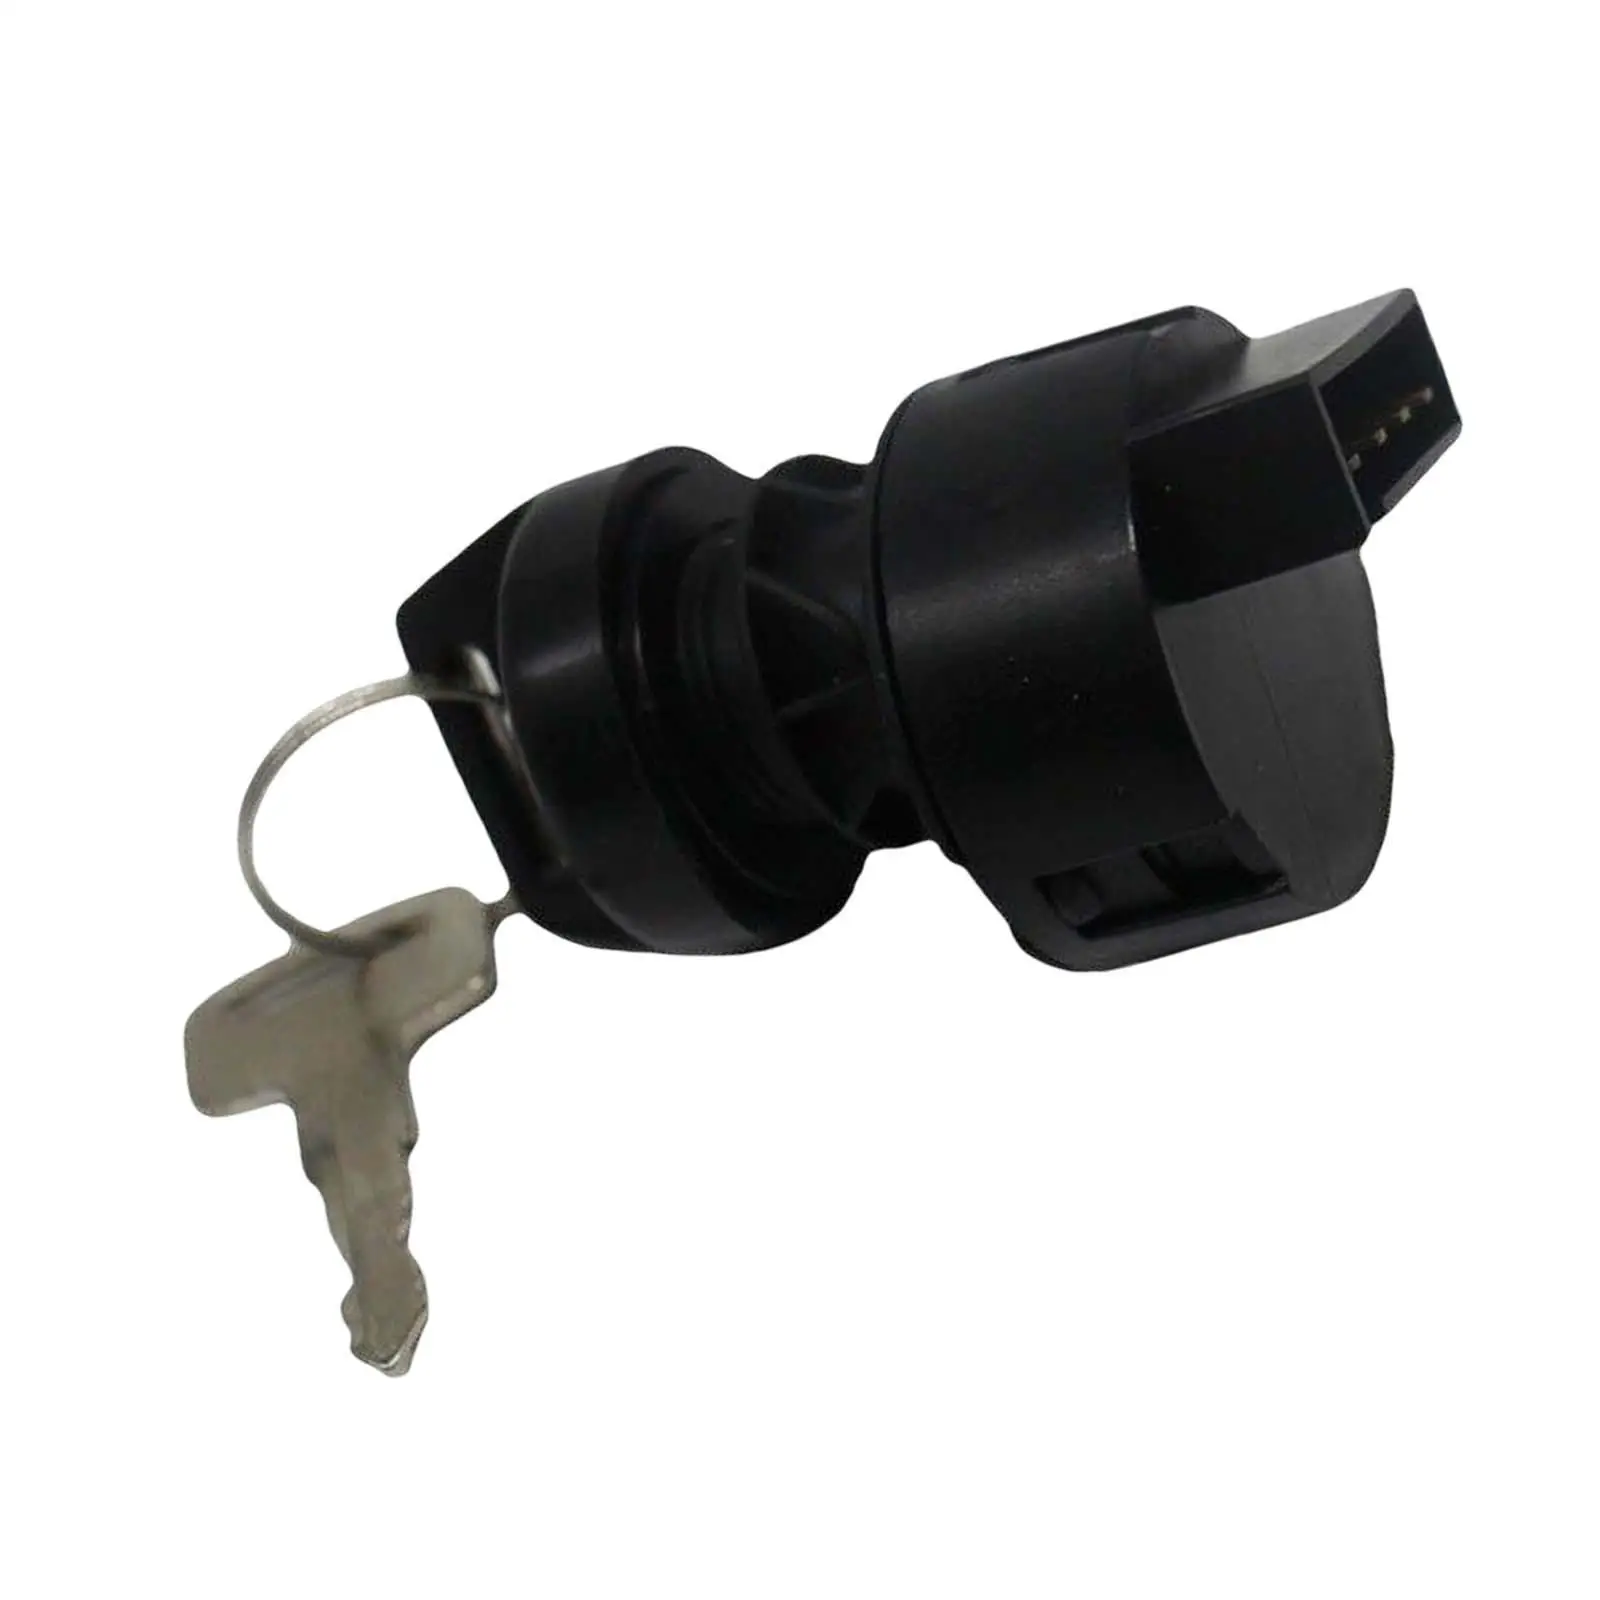 Ignition Switch Lock Replaces Accessories Practical with 2 Keys Easy to Install Premium Parts for 335 400 500 600